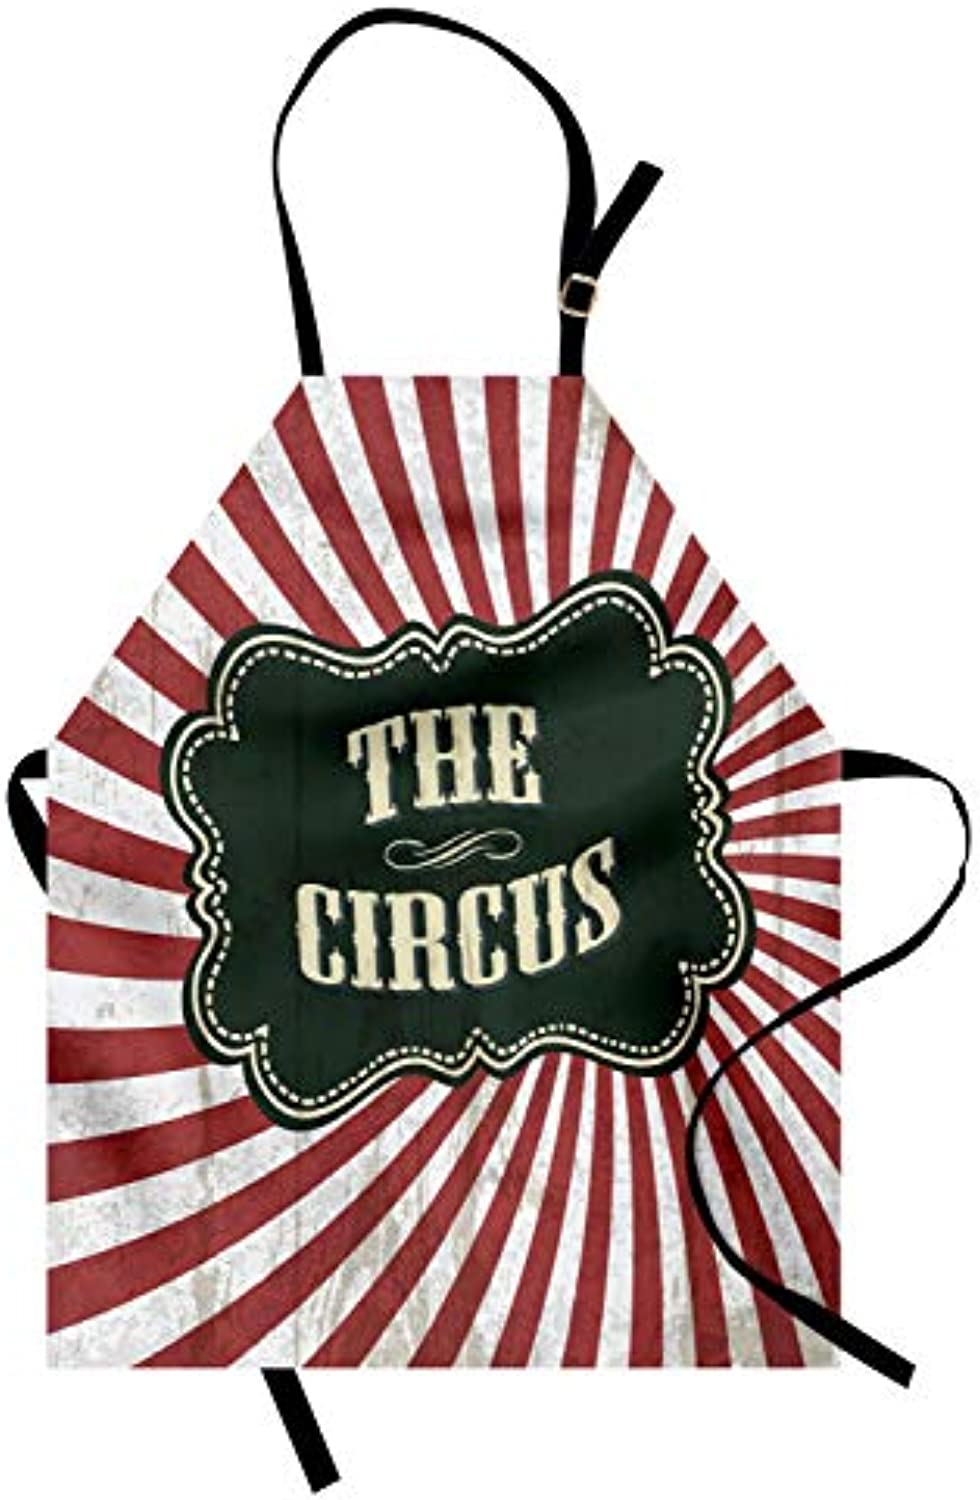 Granbey Circus Apron  Classical Circus Show Event Advertisement Theme Antique Art Logotype Print  Unisex Kitchen Bib with Adjustable Neck for Cooking Gardening  Adult Size  Emerald Cream